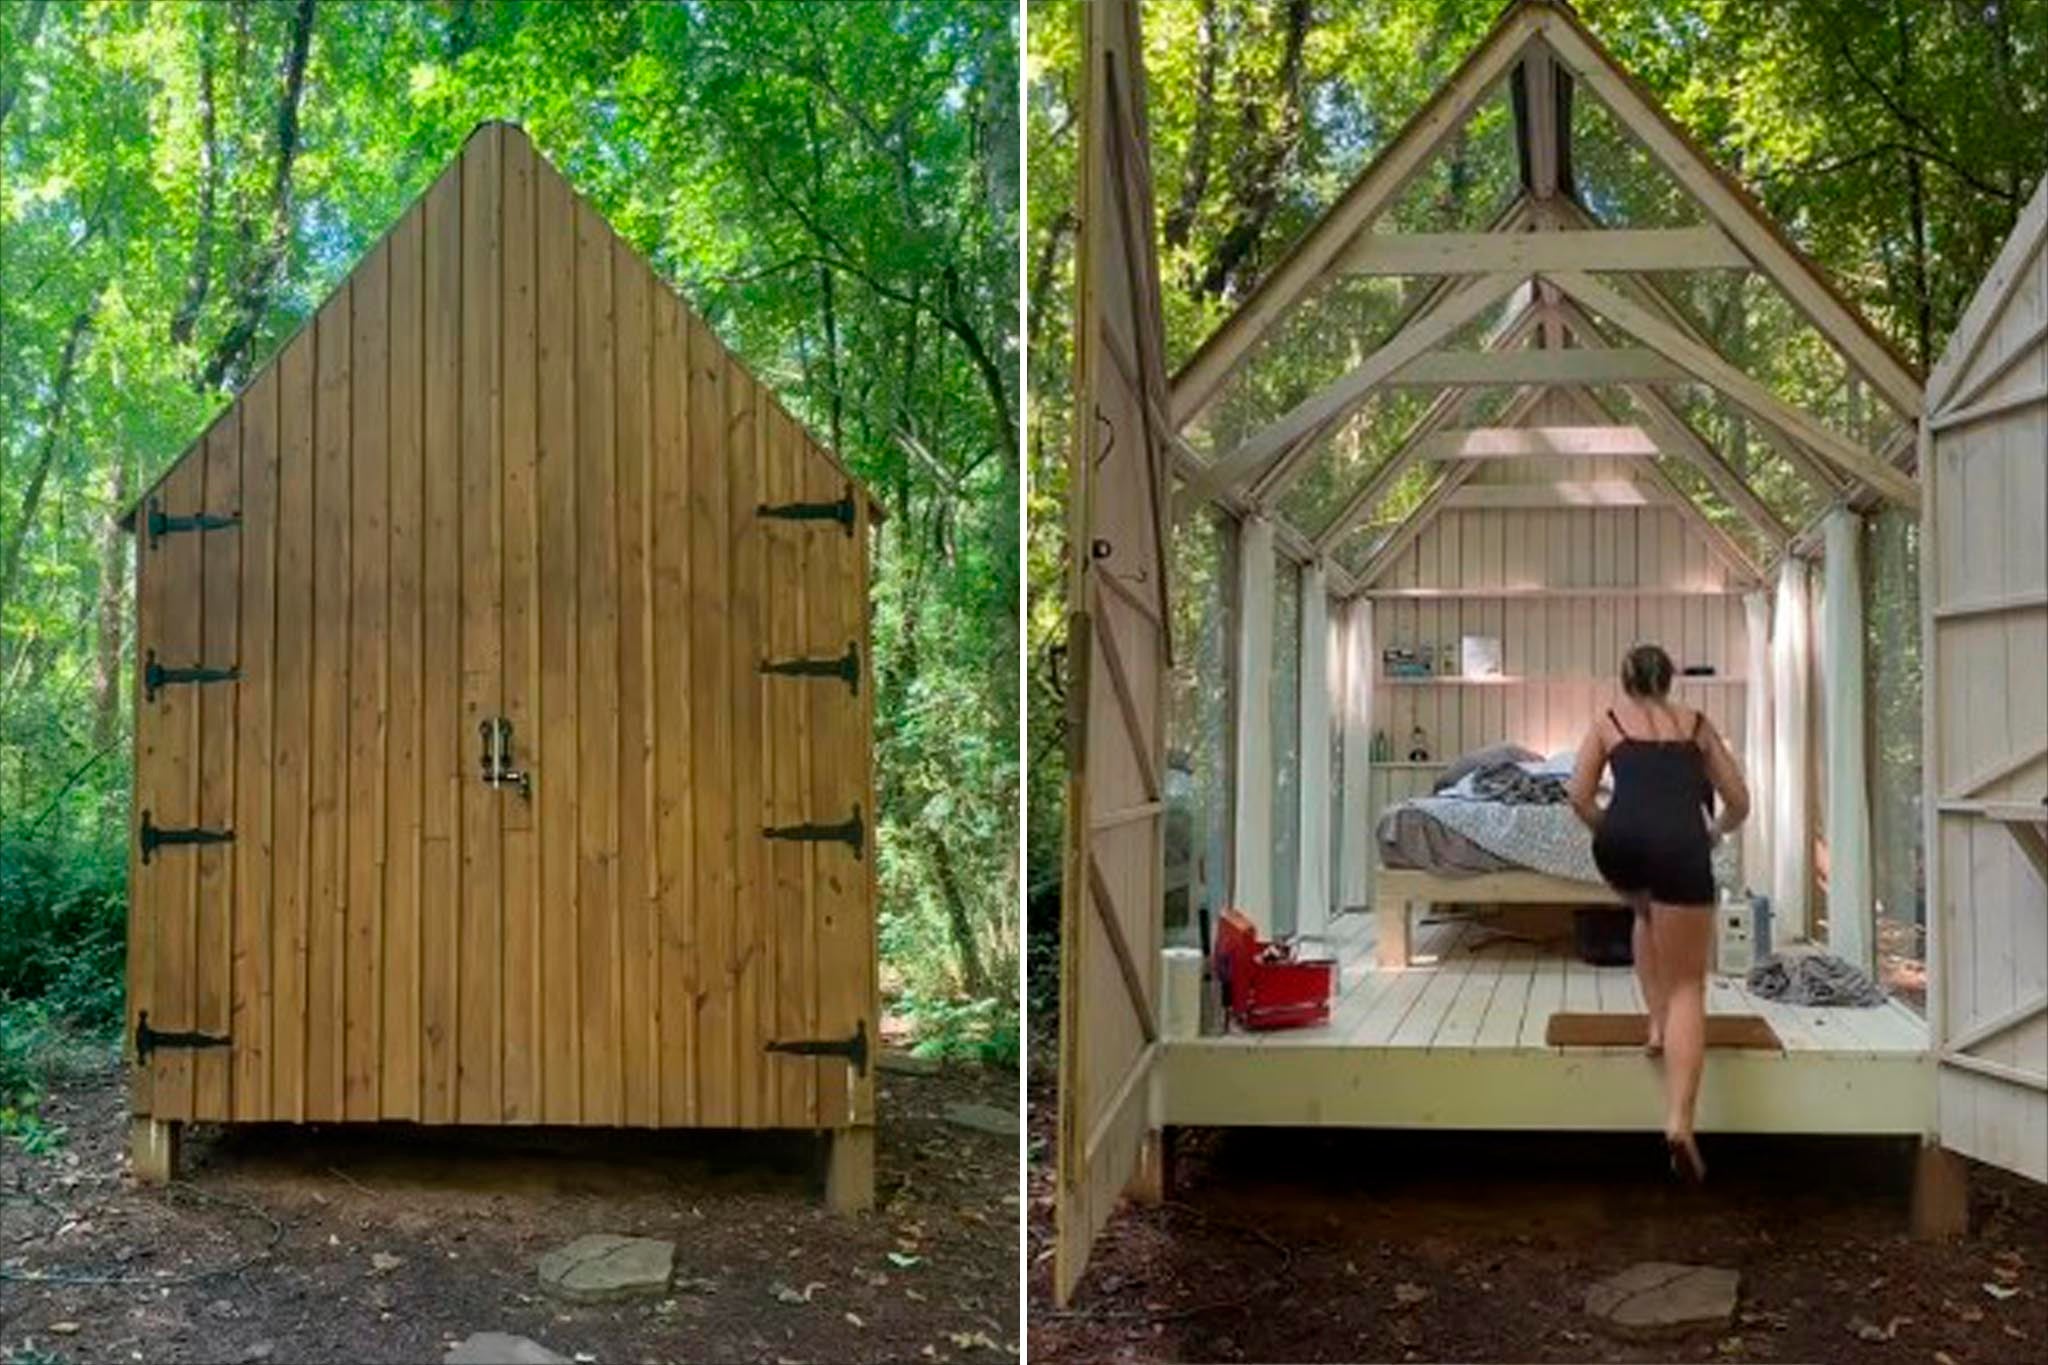 Ms Boice’s Airbnb cabin is located around 45 minutes from Atlanta